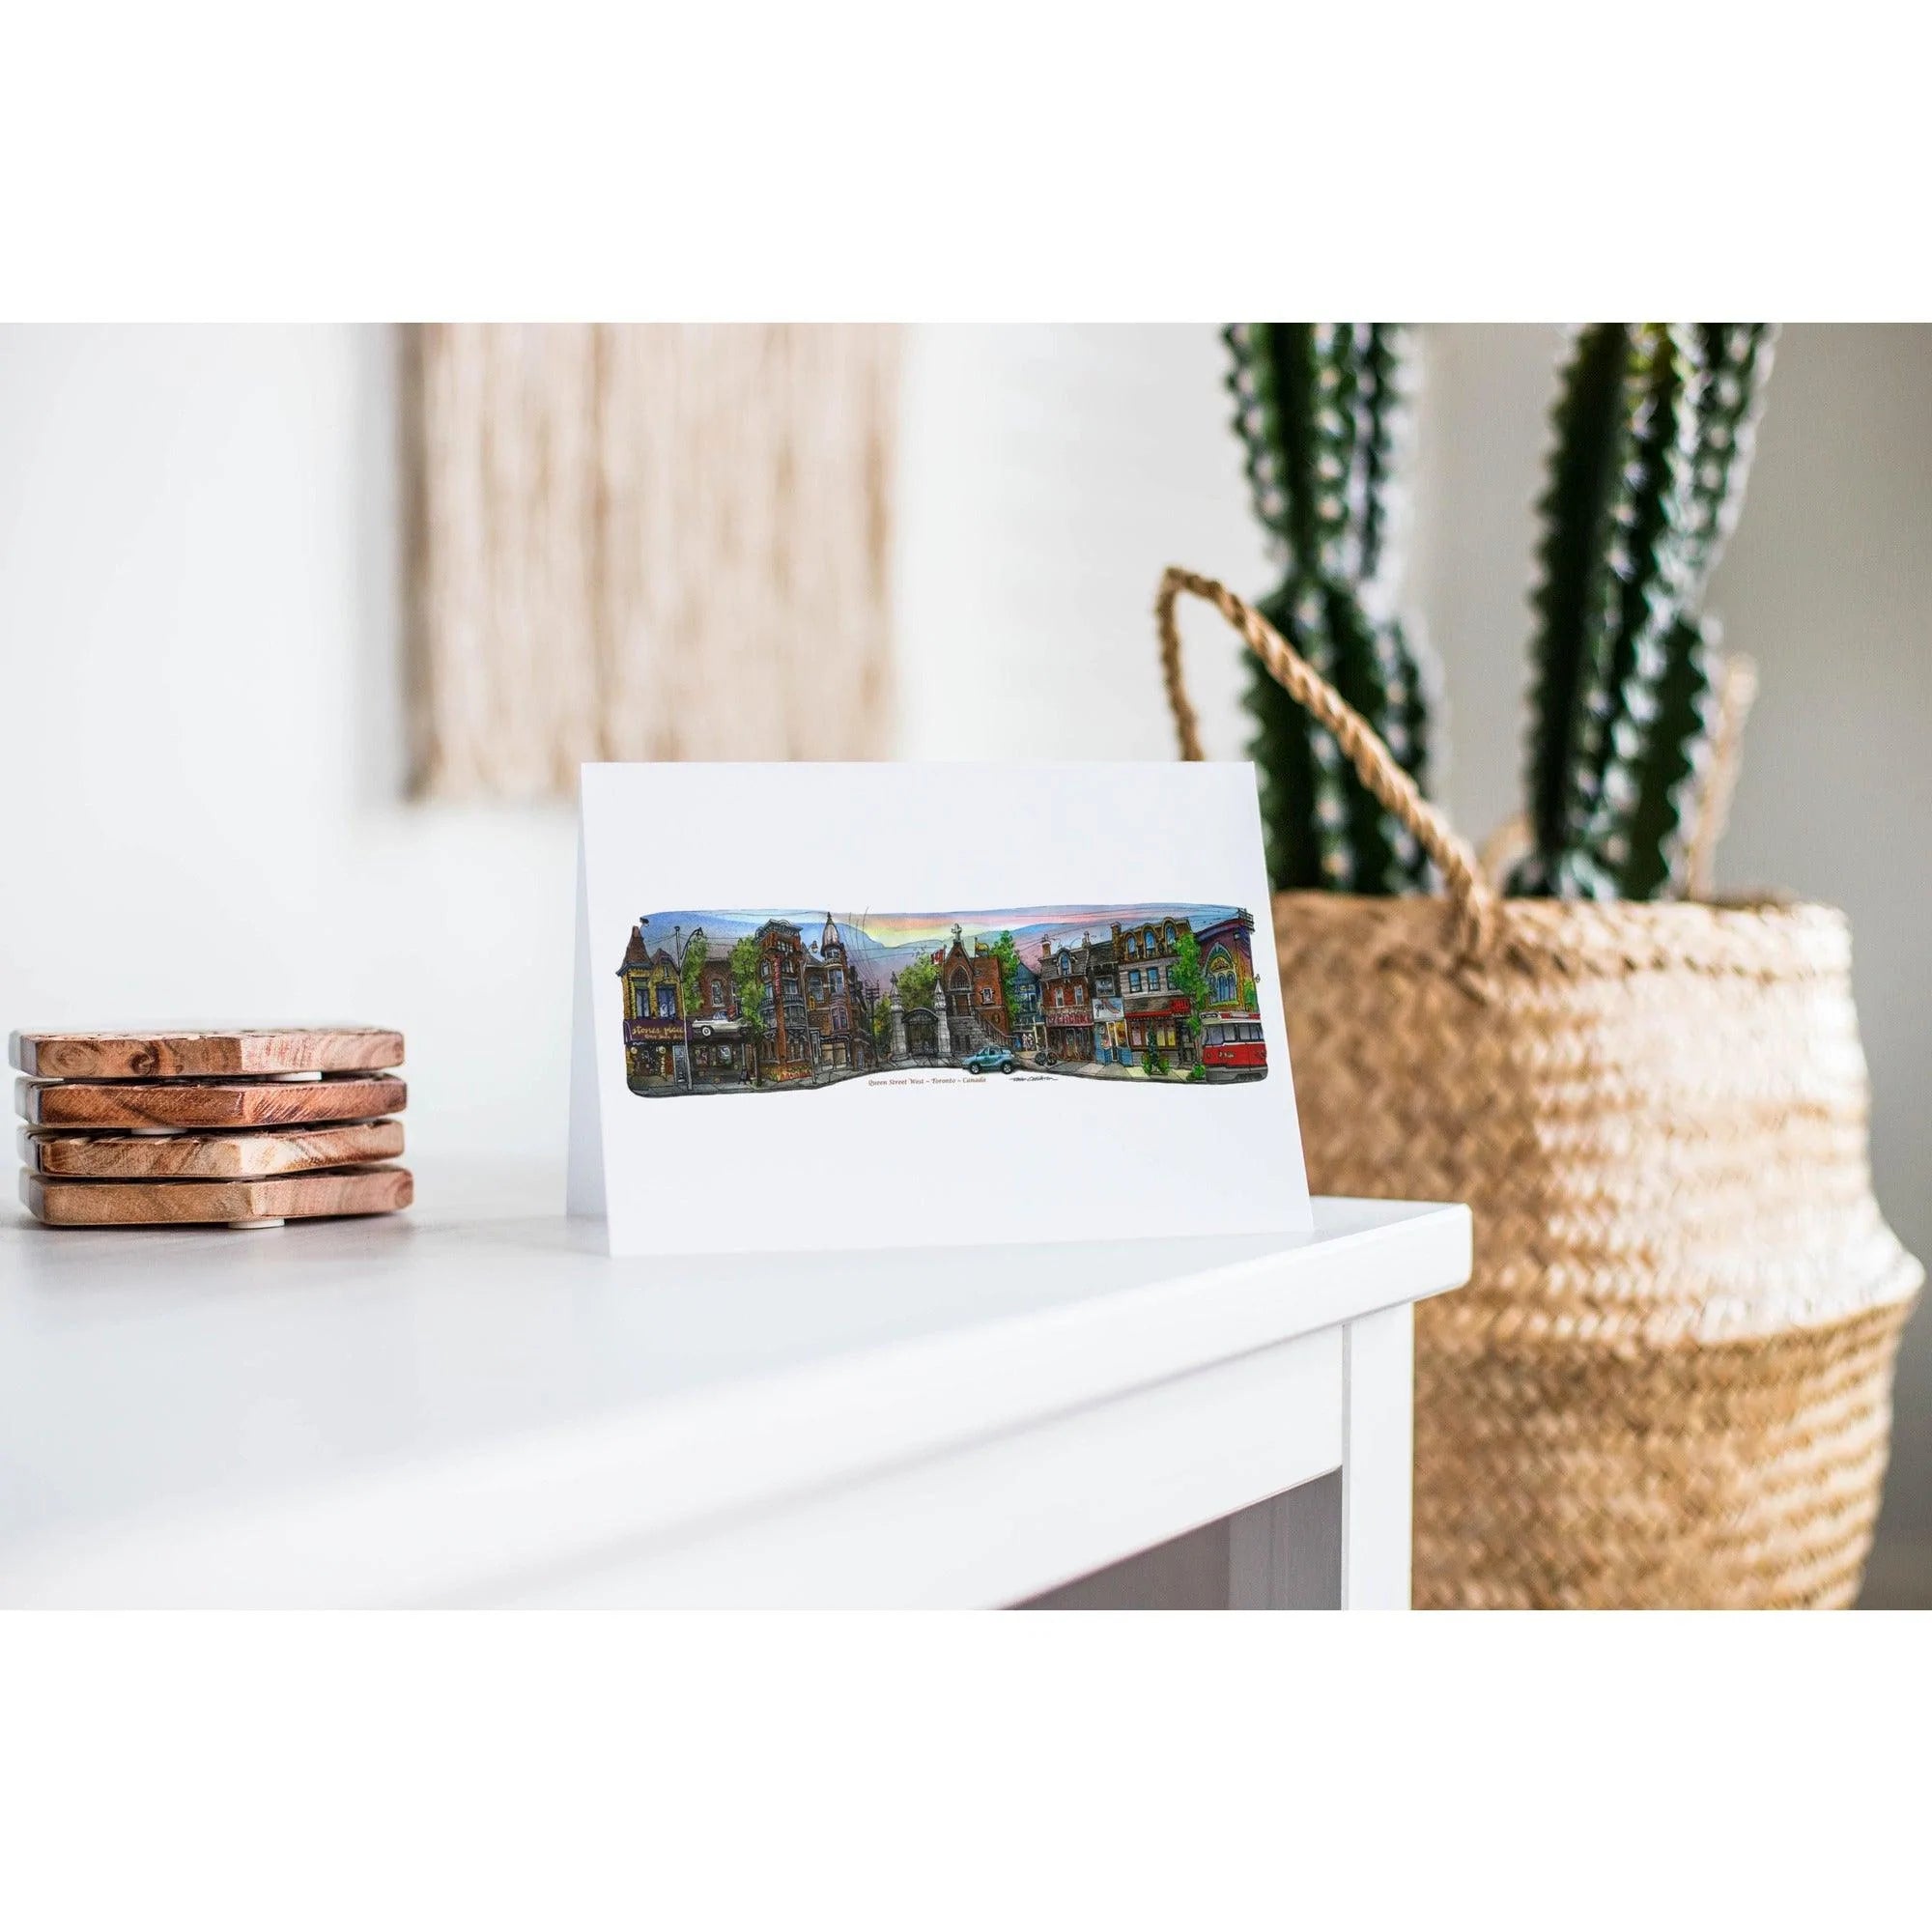 Queen At Trinity Bellwoods Toronto Greeting Card | Totally Toronto Art Inc. 